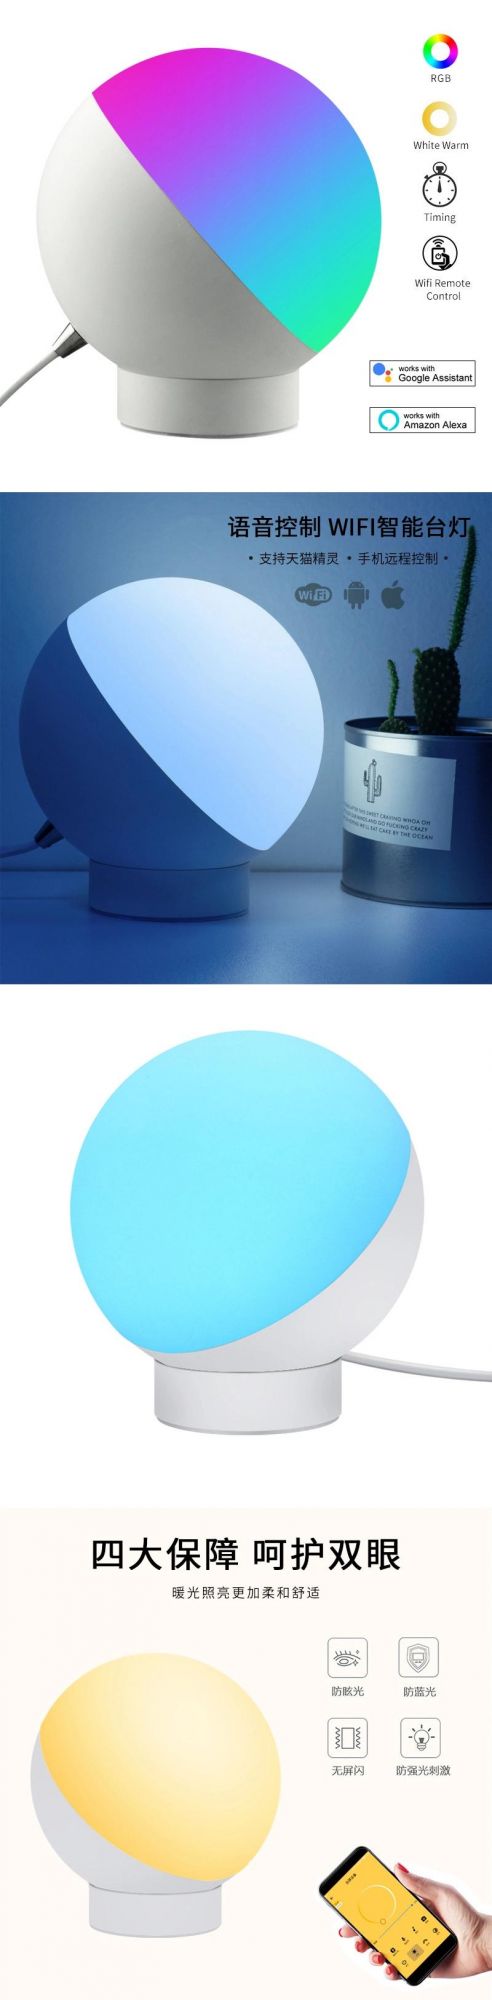 New Product WiFi LED Smart Table Lamp with Speaker